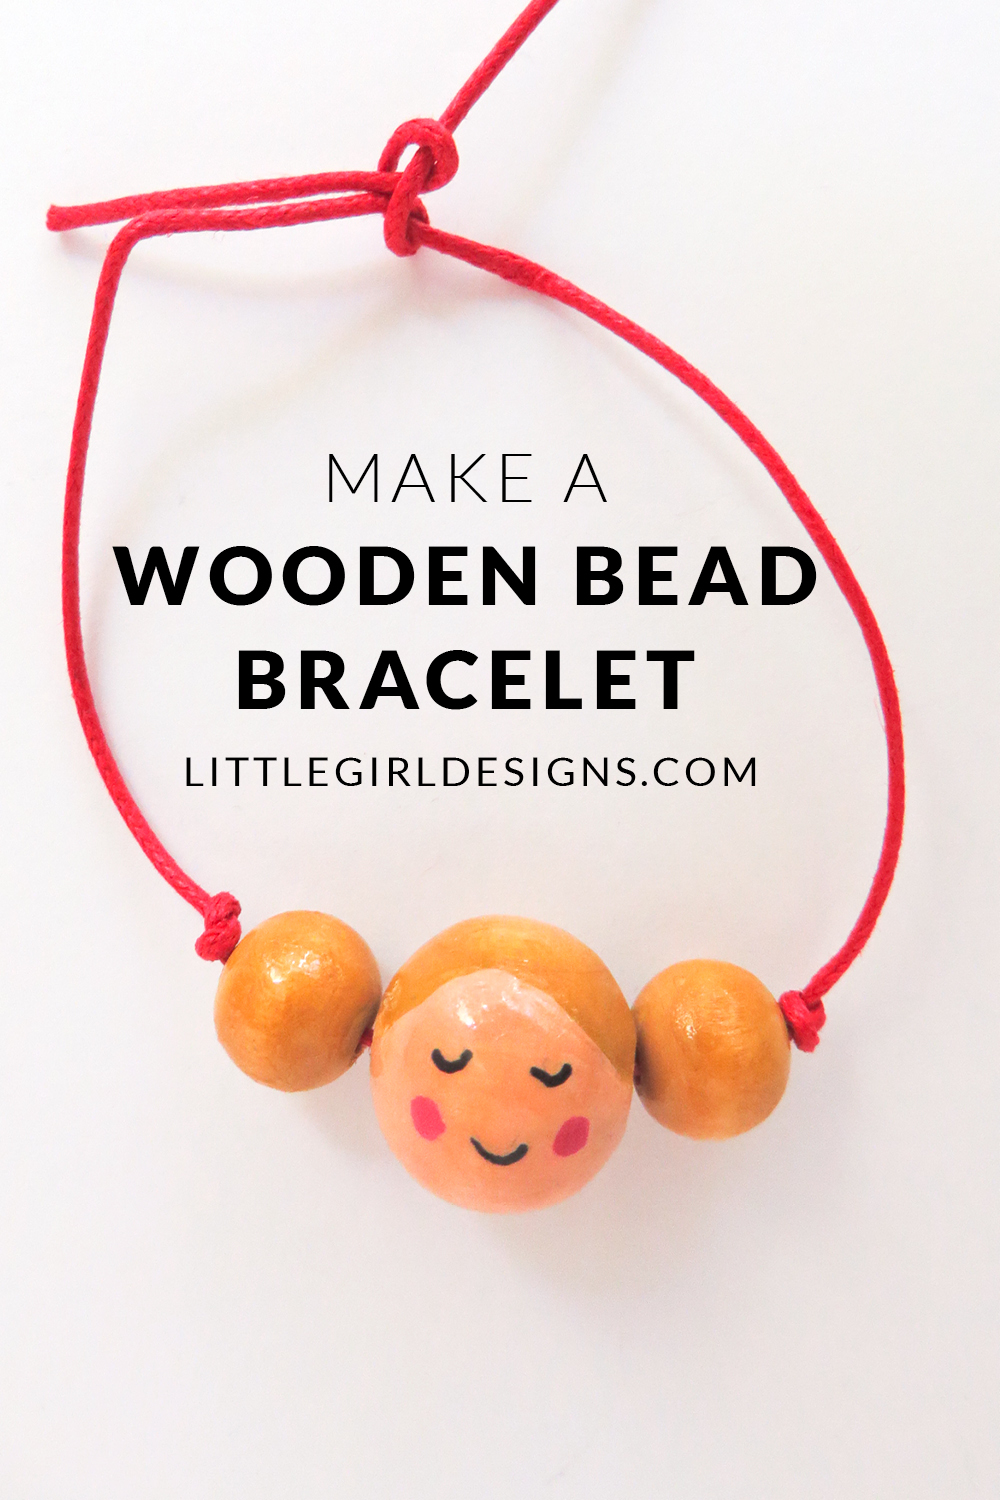 Make a Wooden Bead Bracelet - How to make a simple bracelet from wooden beads. I customized this one to look like my daughter, and you can too! Such an easy and fun craft. :) @ littlegirldesigns.com